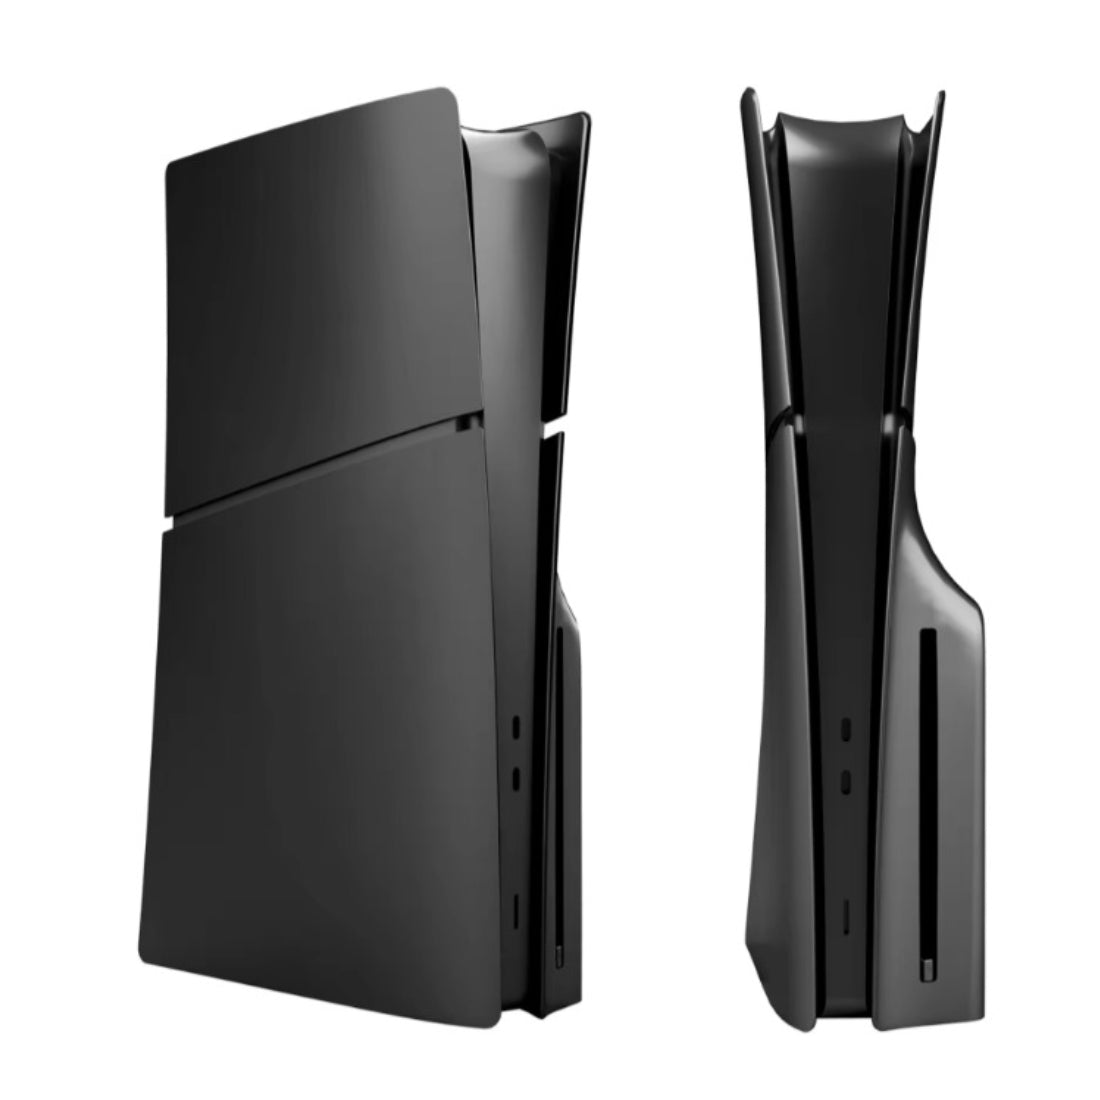 Faceplate Slim Plastic Cover For Playstation 5 - Disc Edition - Black - أكسسوار